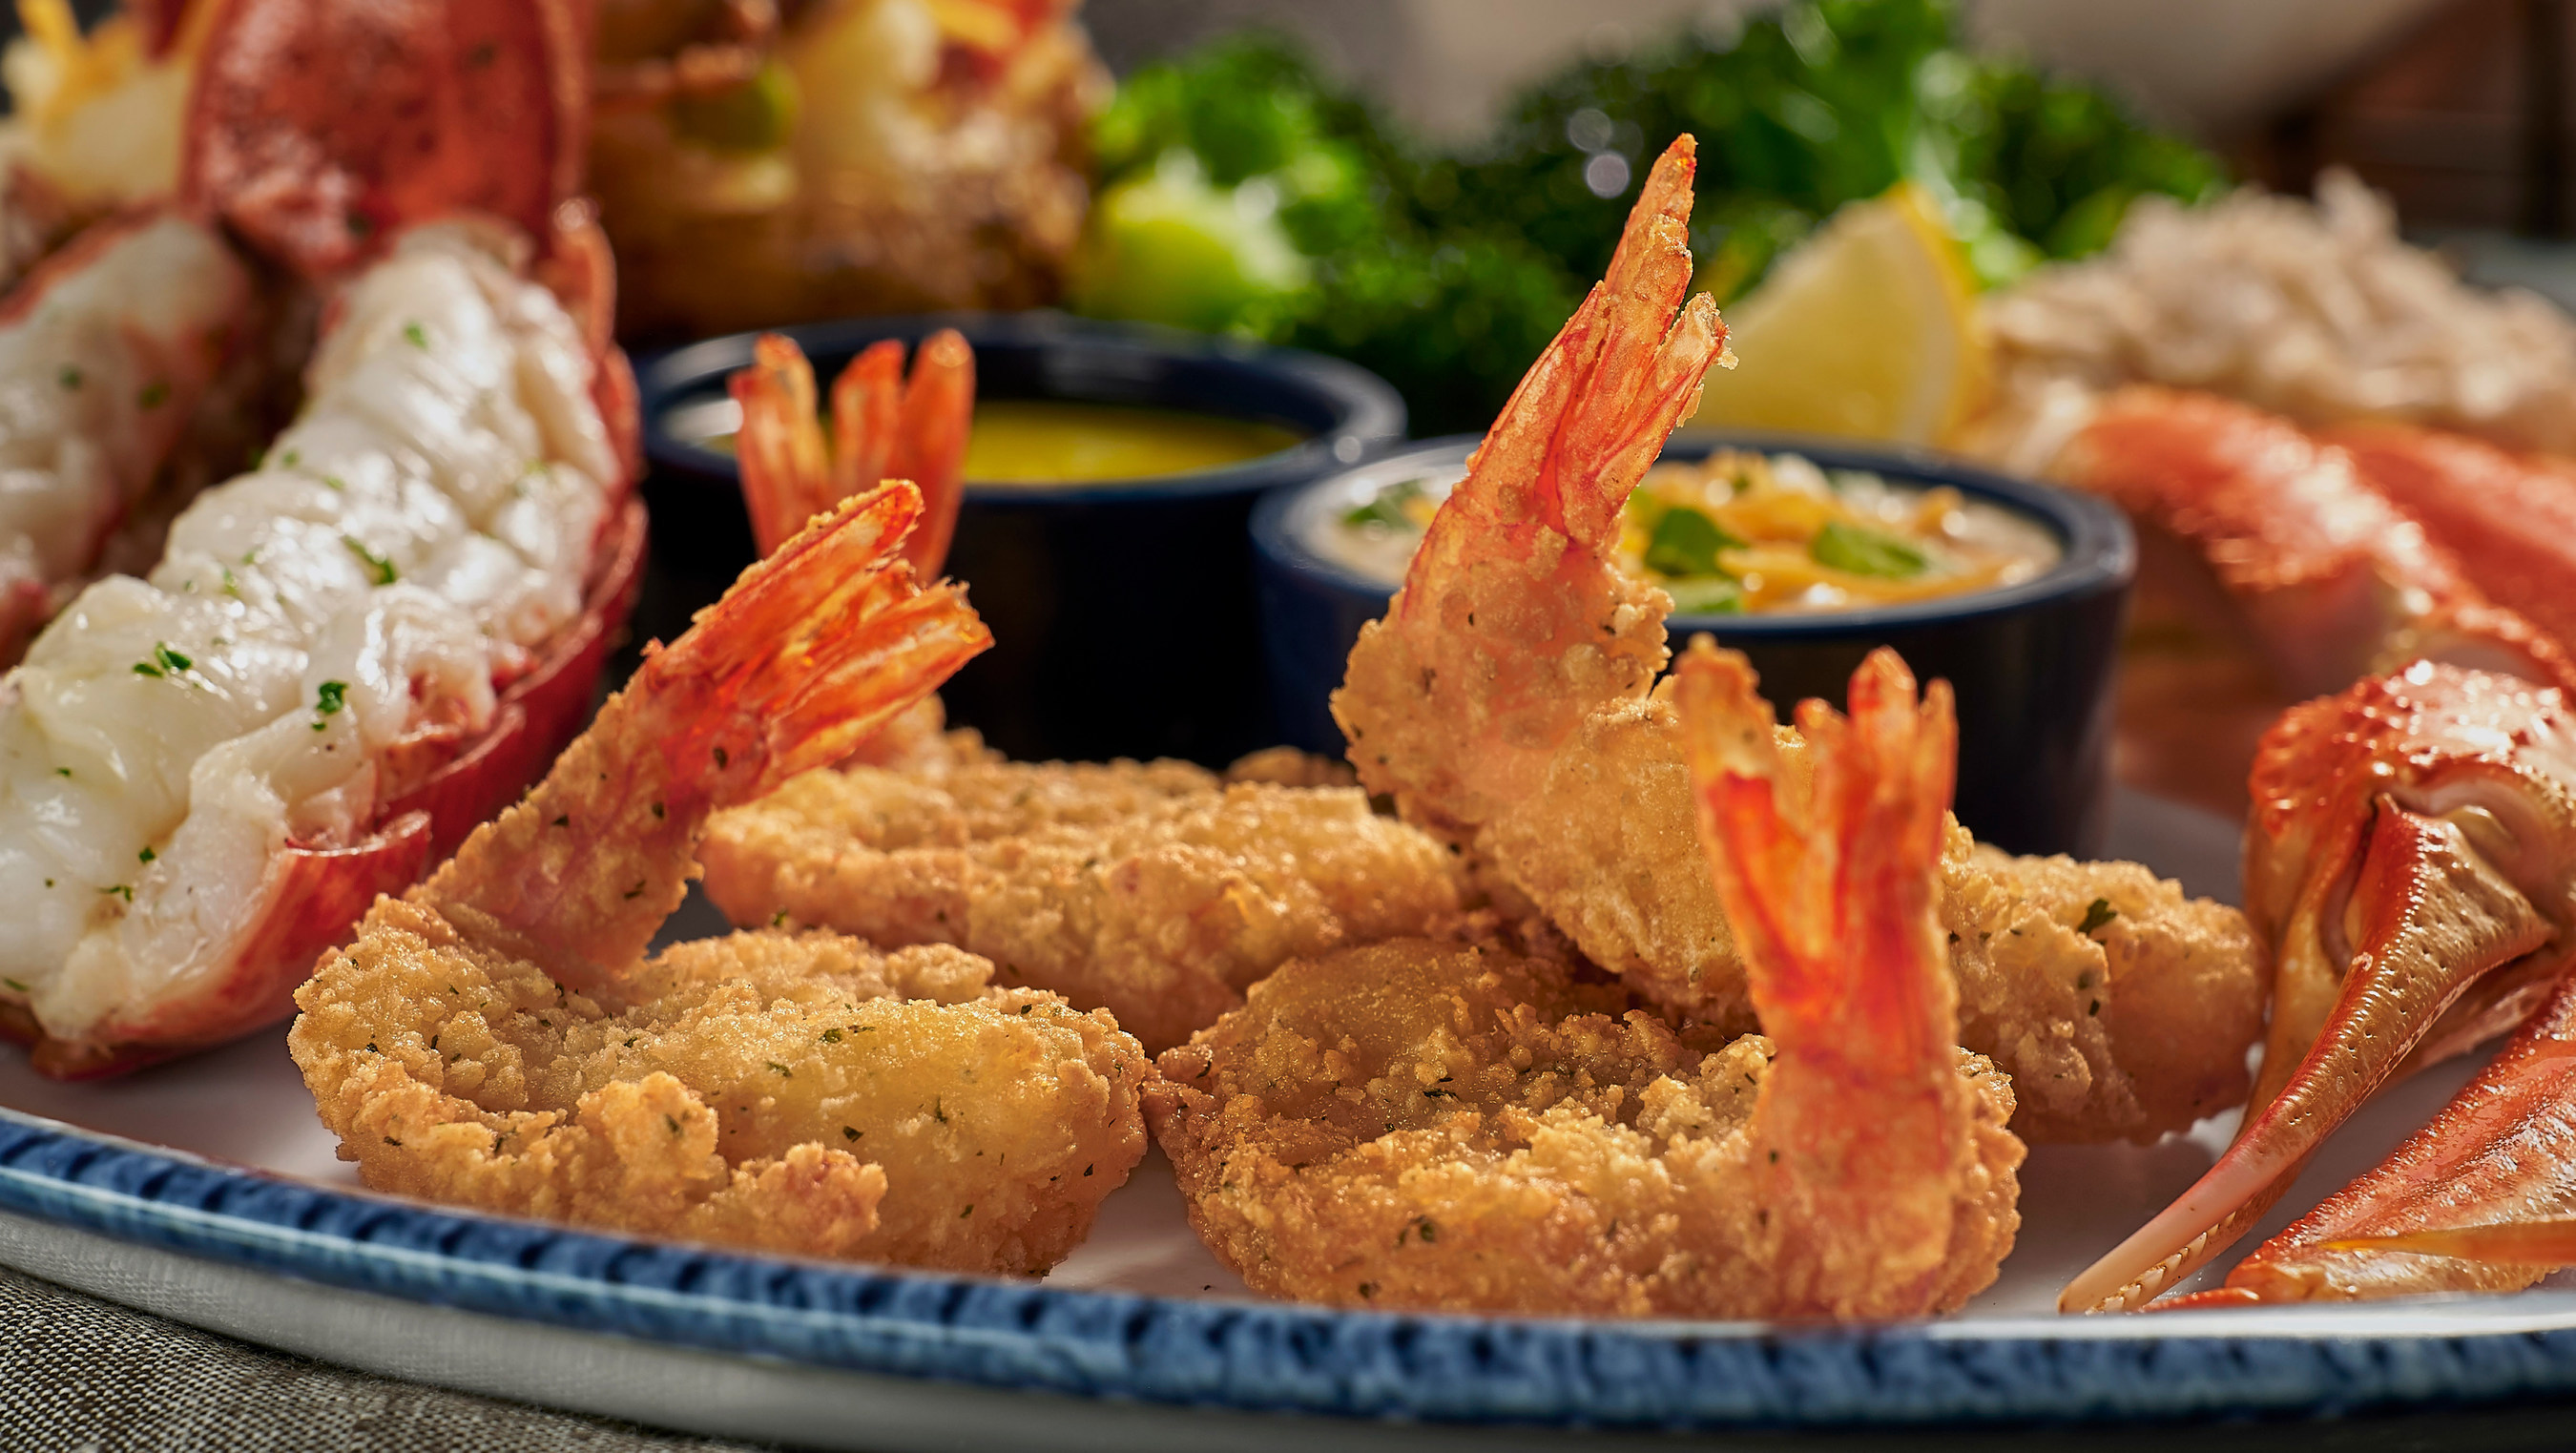 Red Lobster Shares Greatest Gift for the Holidays That Combines Iconic Menu Item with Shrimp